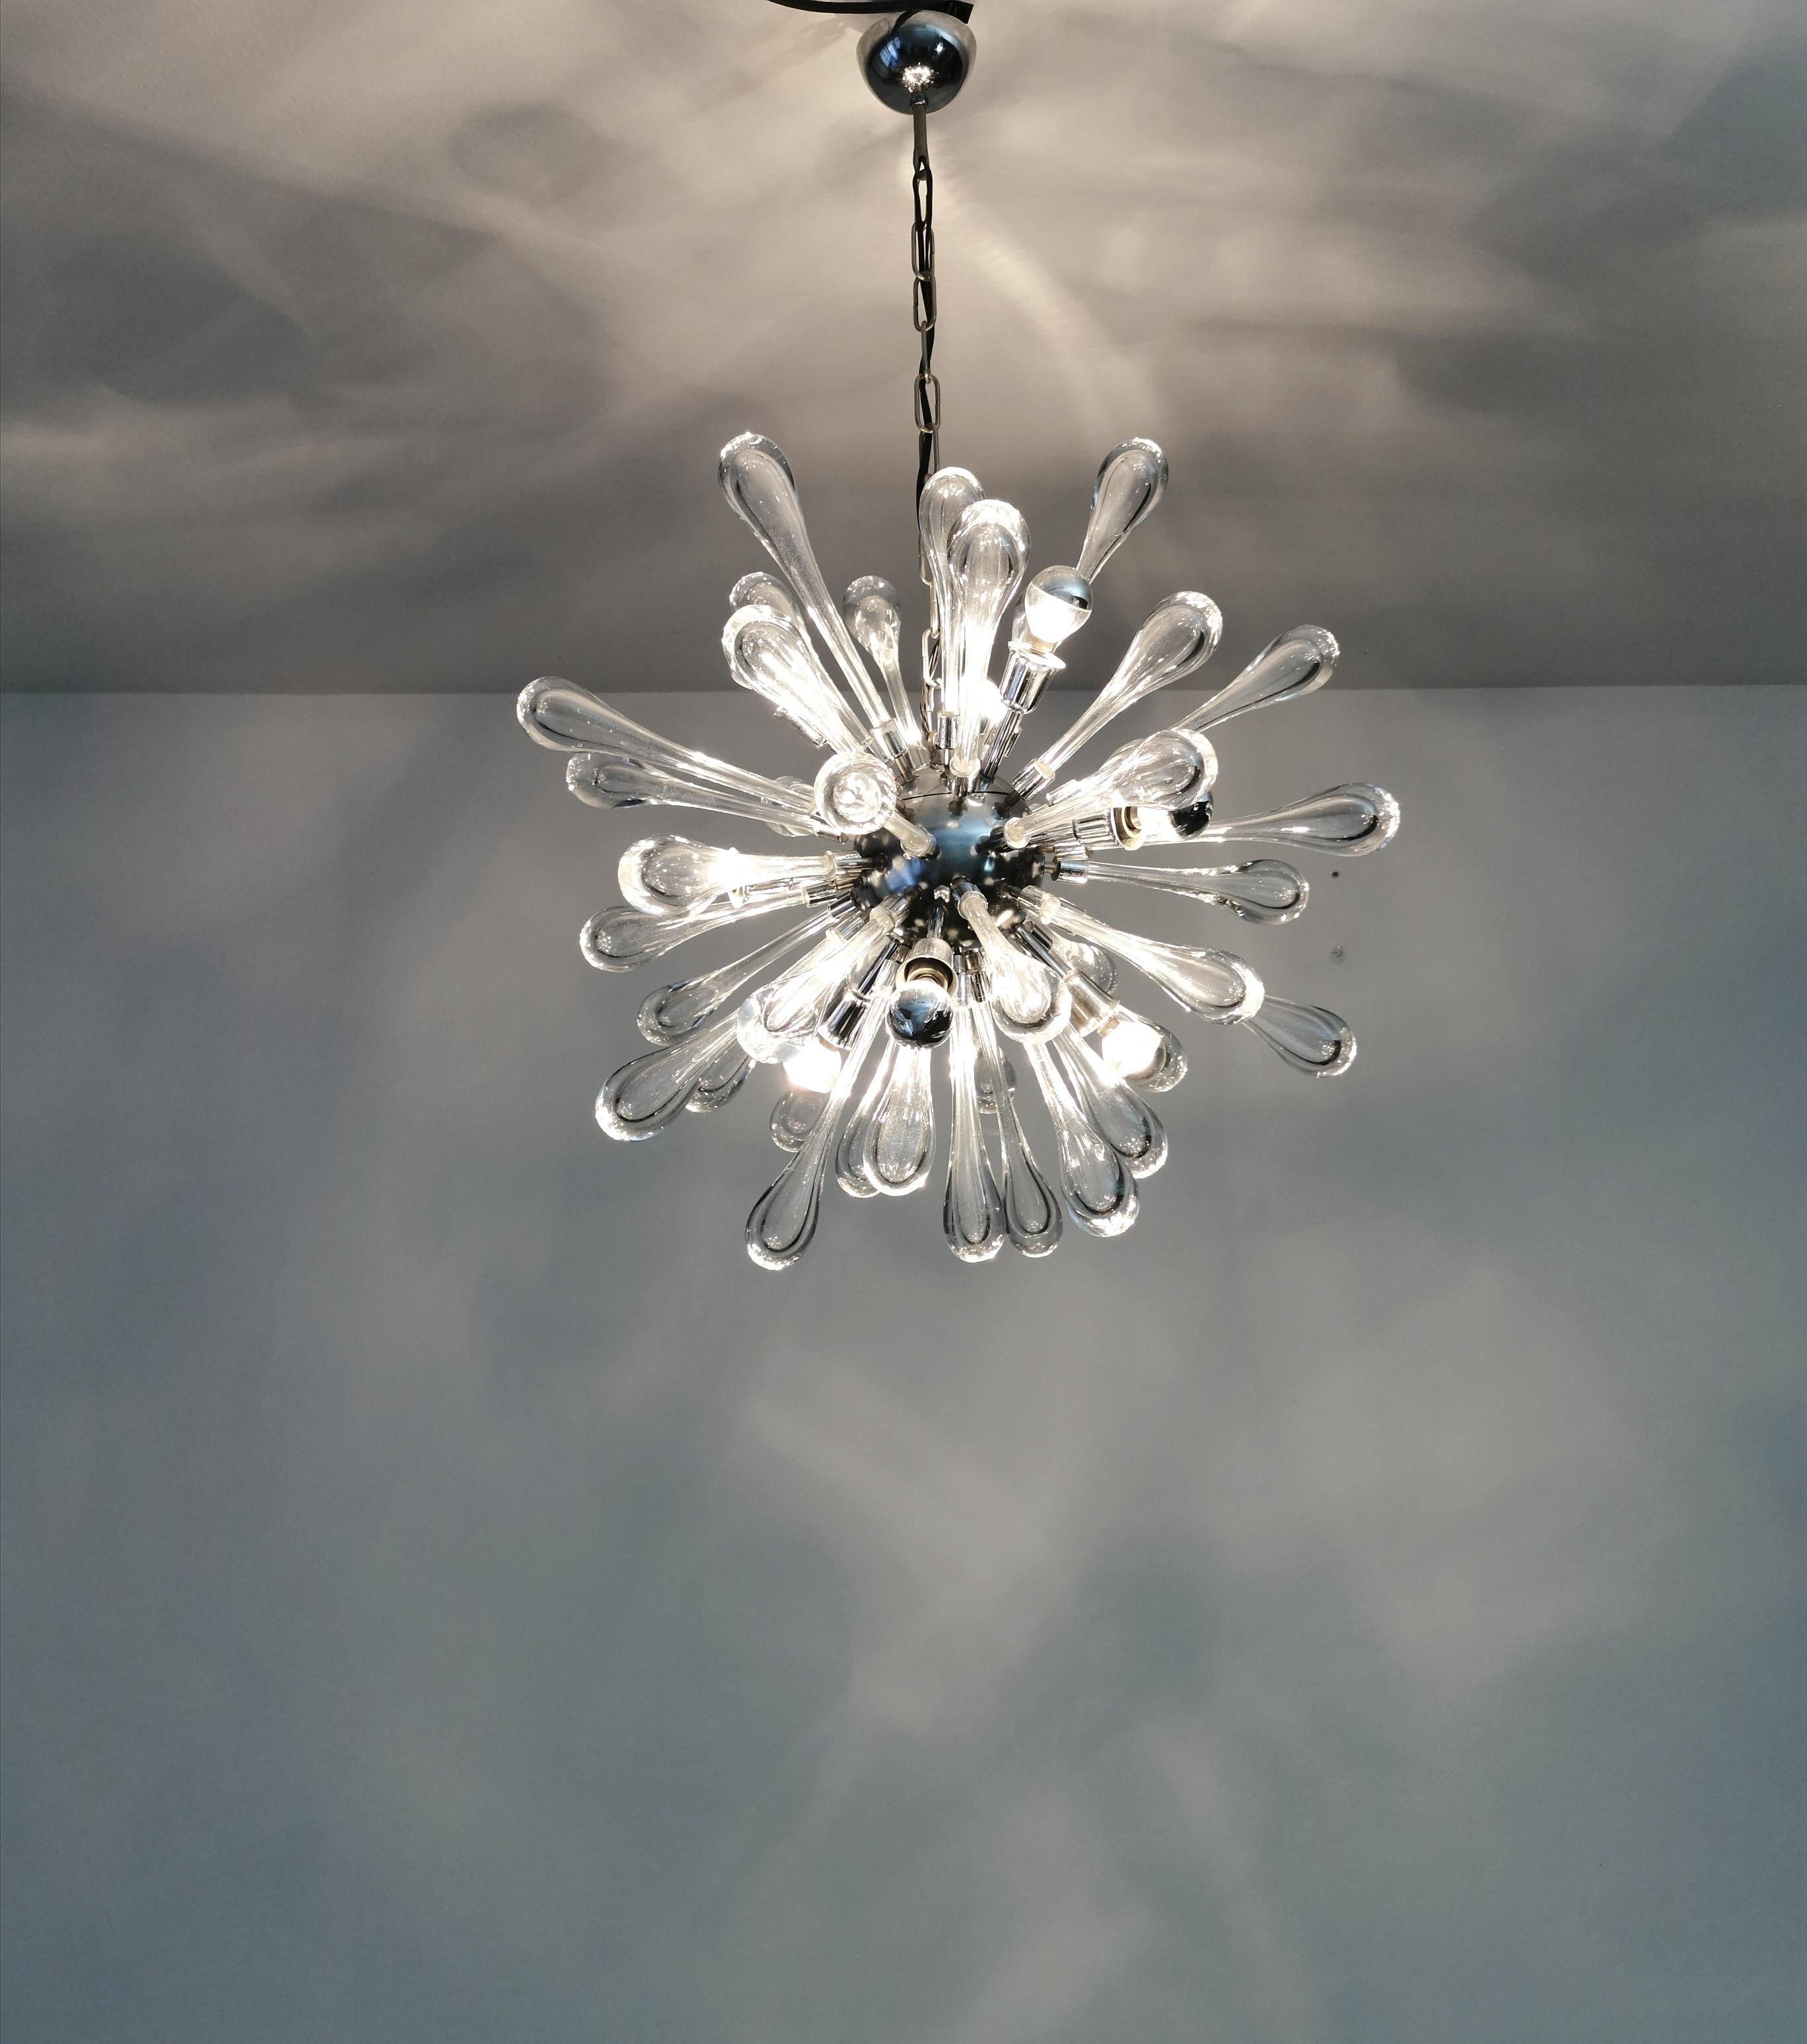 Suspension lamp with nine lights E14 model Sputnik, circular body with 40 drop glasses in transparent and heat-worked solid Murano glass. Murano production from the 1960s.